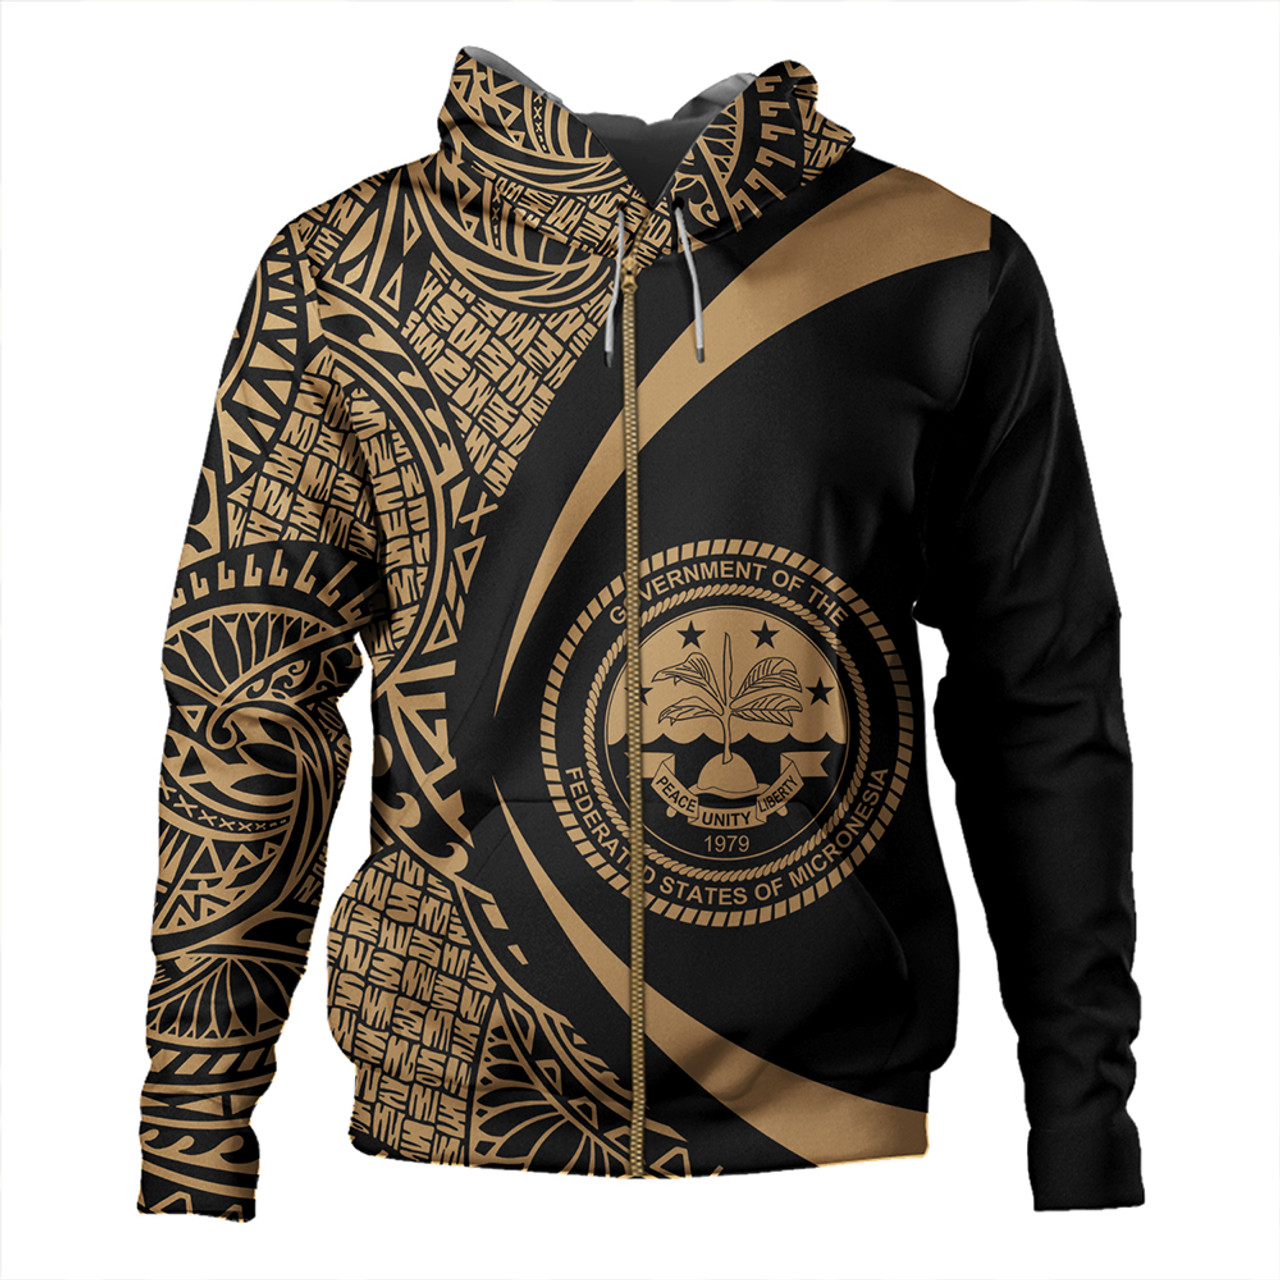 Federated States of Micronesia Hoodie Coat Of Arm Lauhala Gold Circle